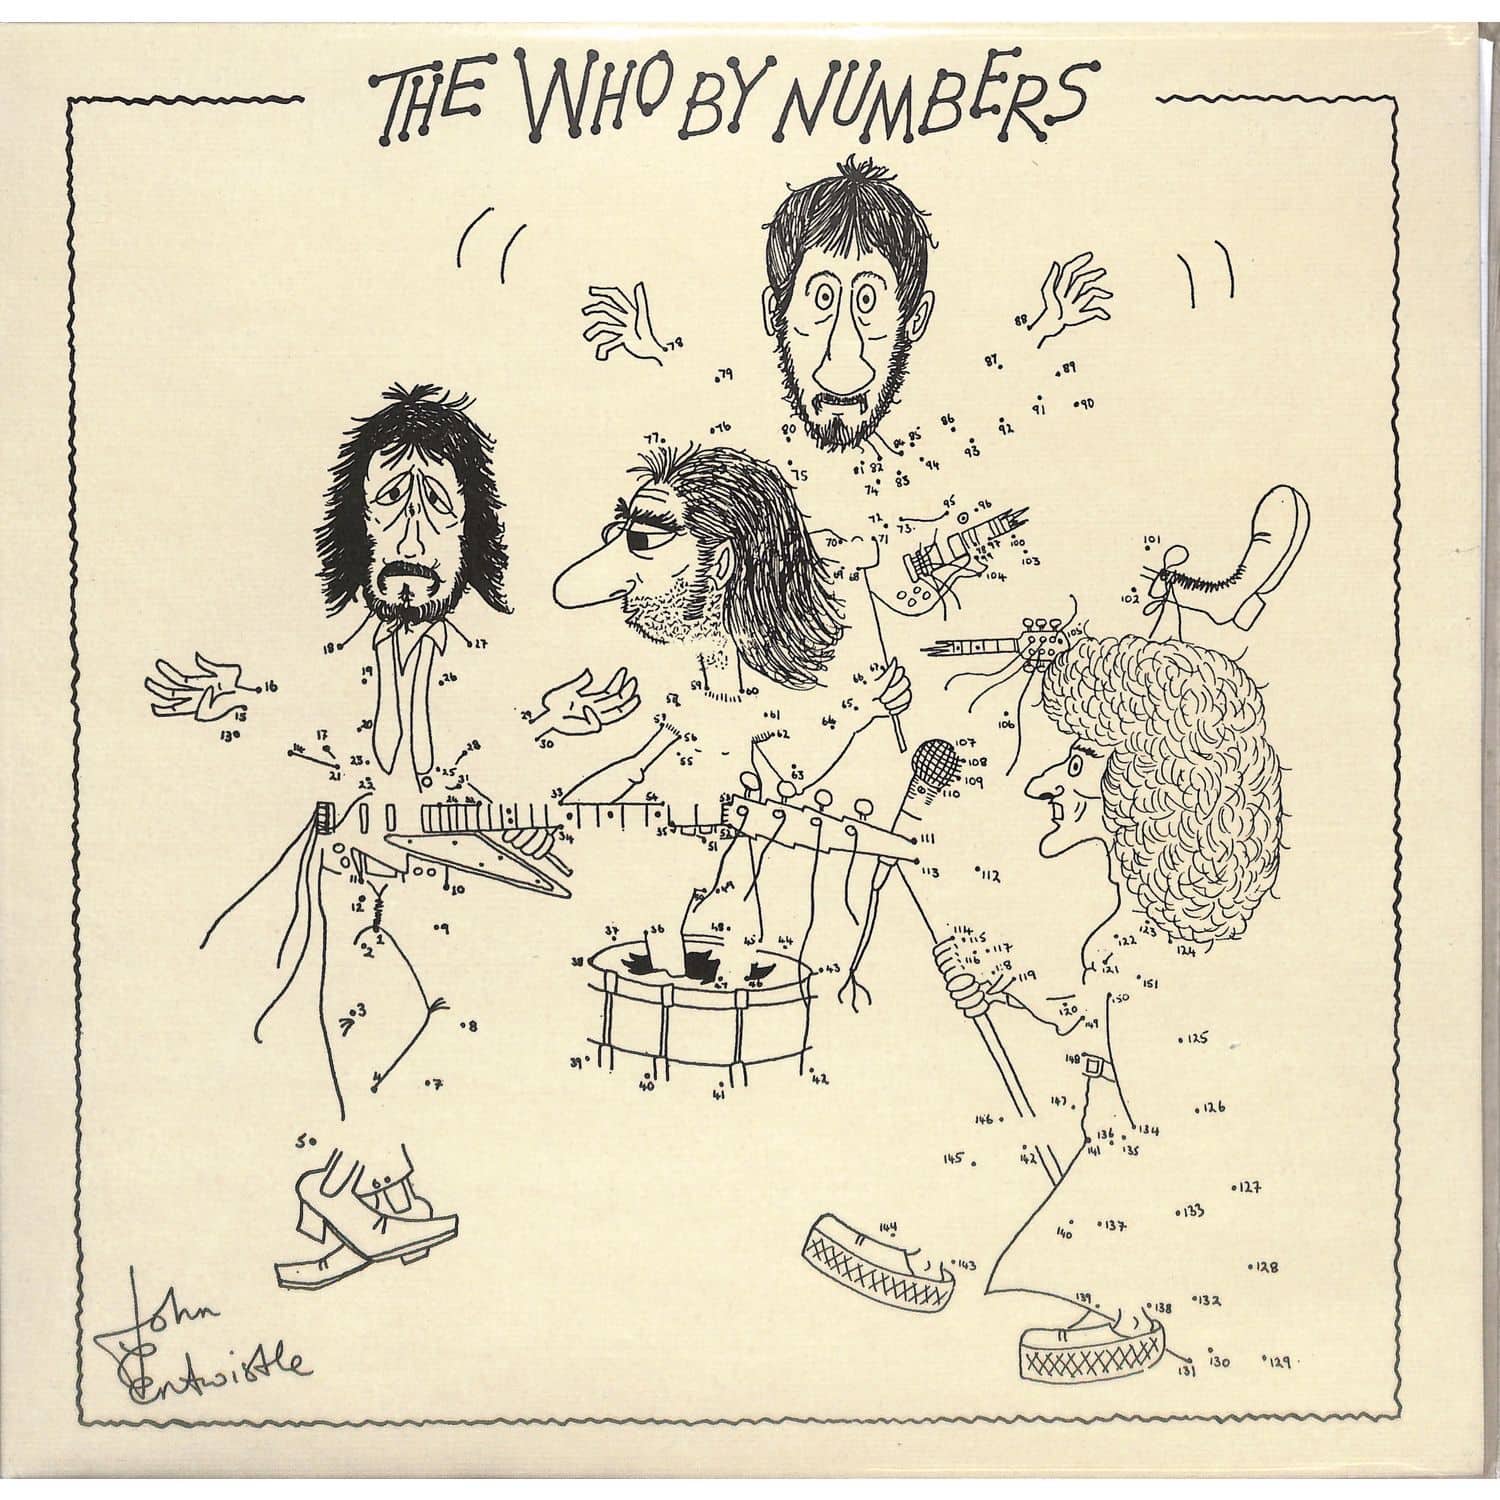 The Who - THE WHO BY NUMBERS 